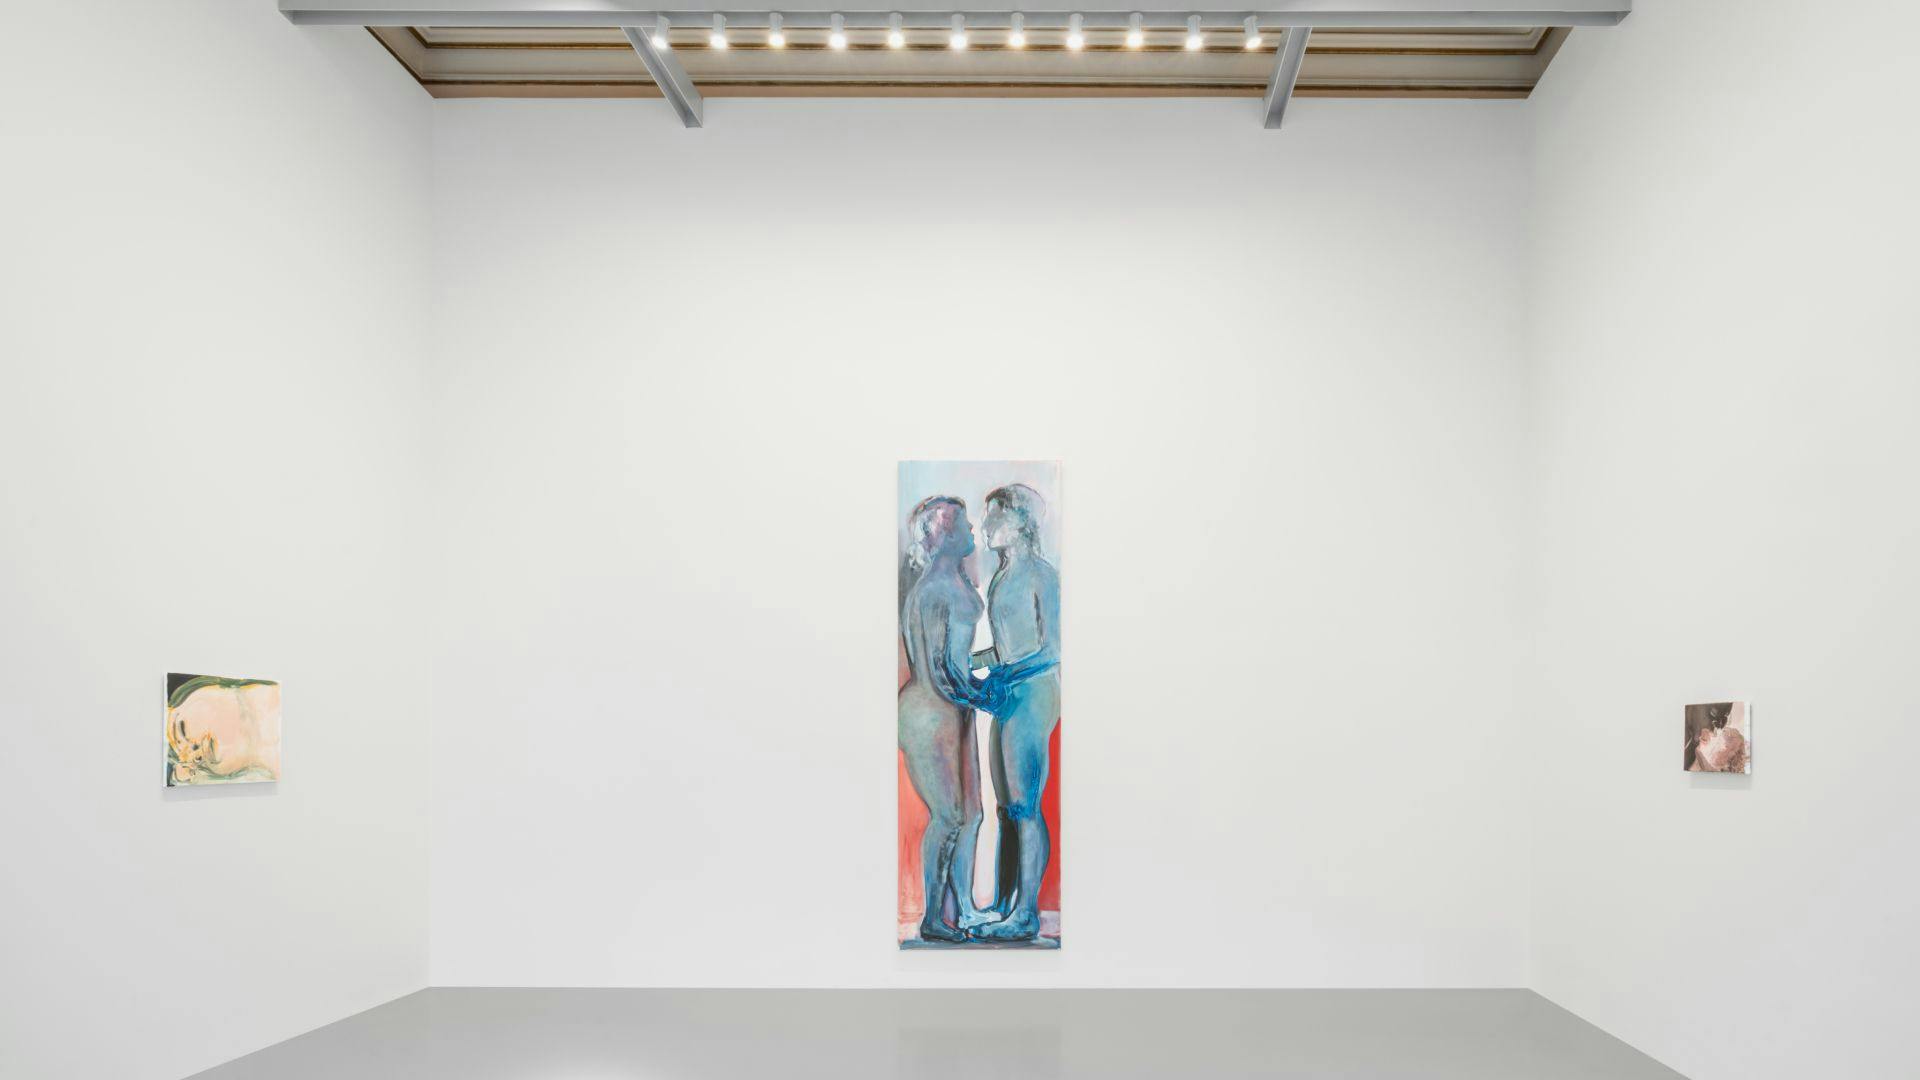 Installation view of the exhibition, Marlene Dumas. open-end, at Palazzo Grassi in Venice, dated 2022.